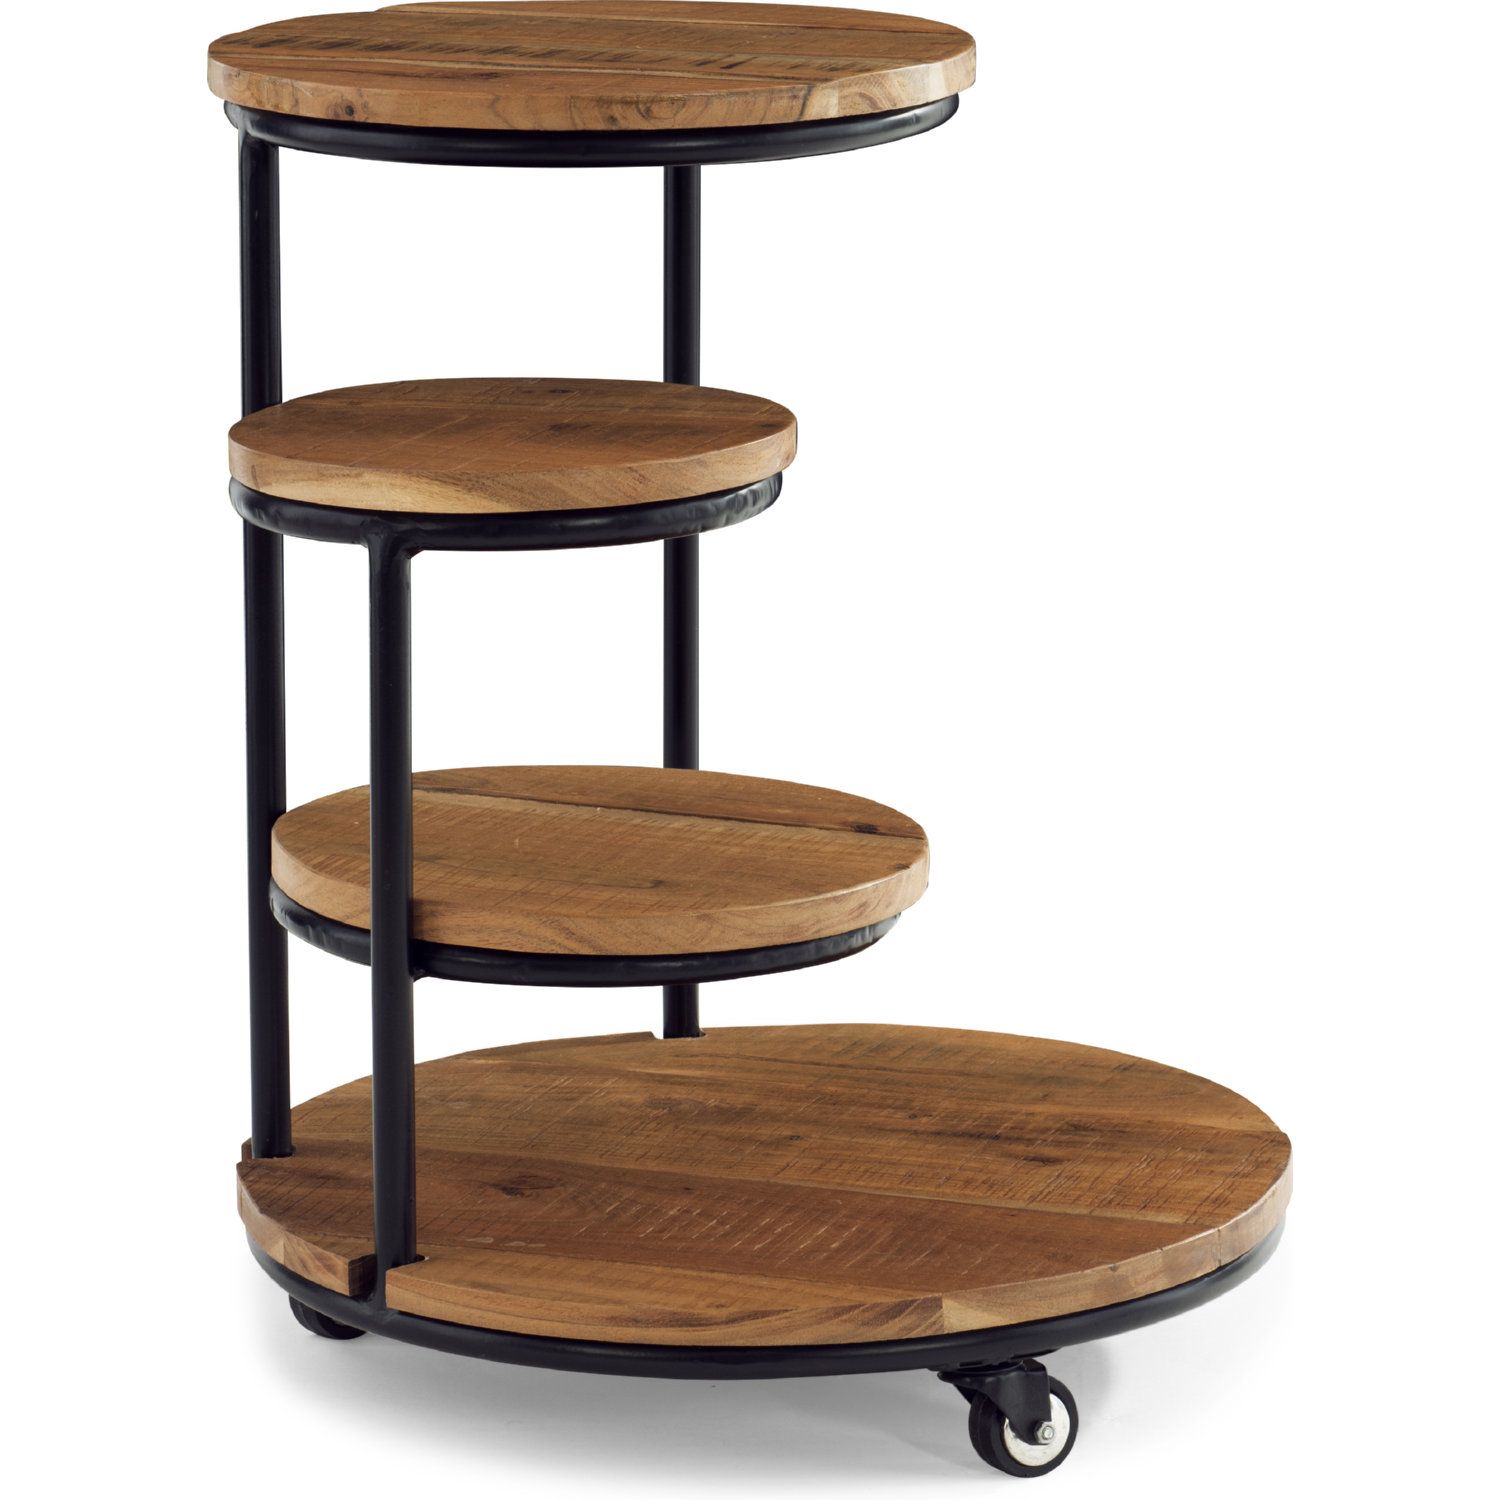 Powell D1247a19ps Collis 4 Tiered Plant Stand W/ Wheels In Wood & Black Intended For 4 Tier Plant Stands (View 10 of 15)